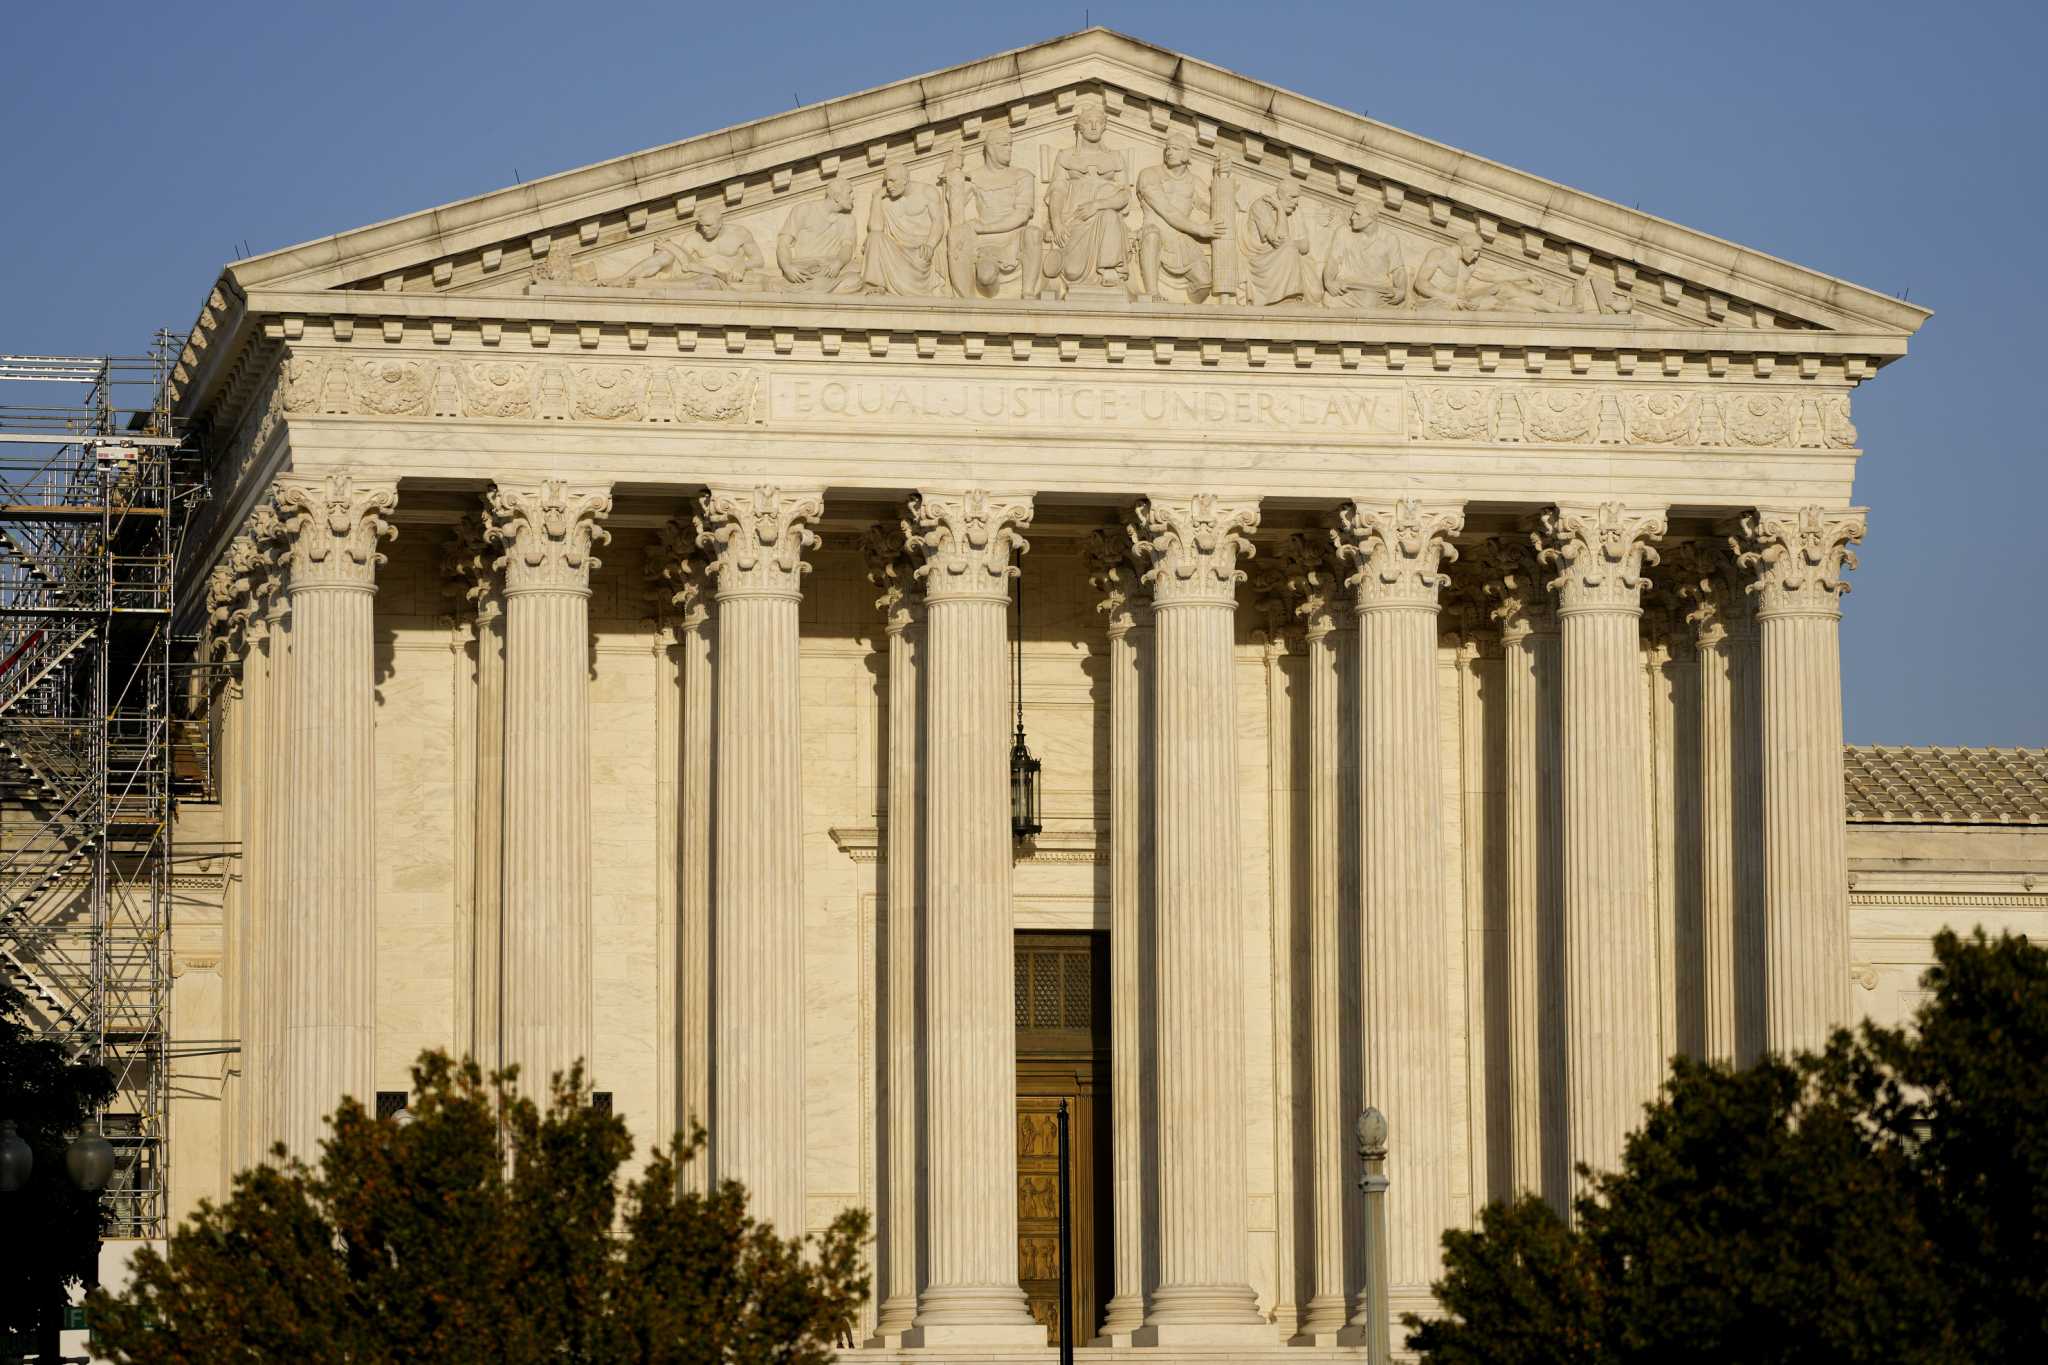 Advocates worry Supreme Court ruling could grow to be an antiabortion tool